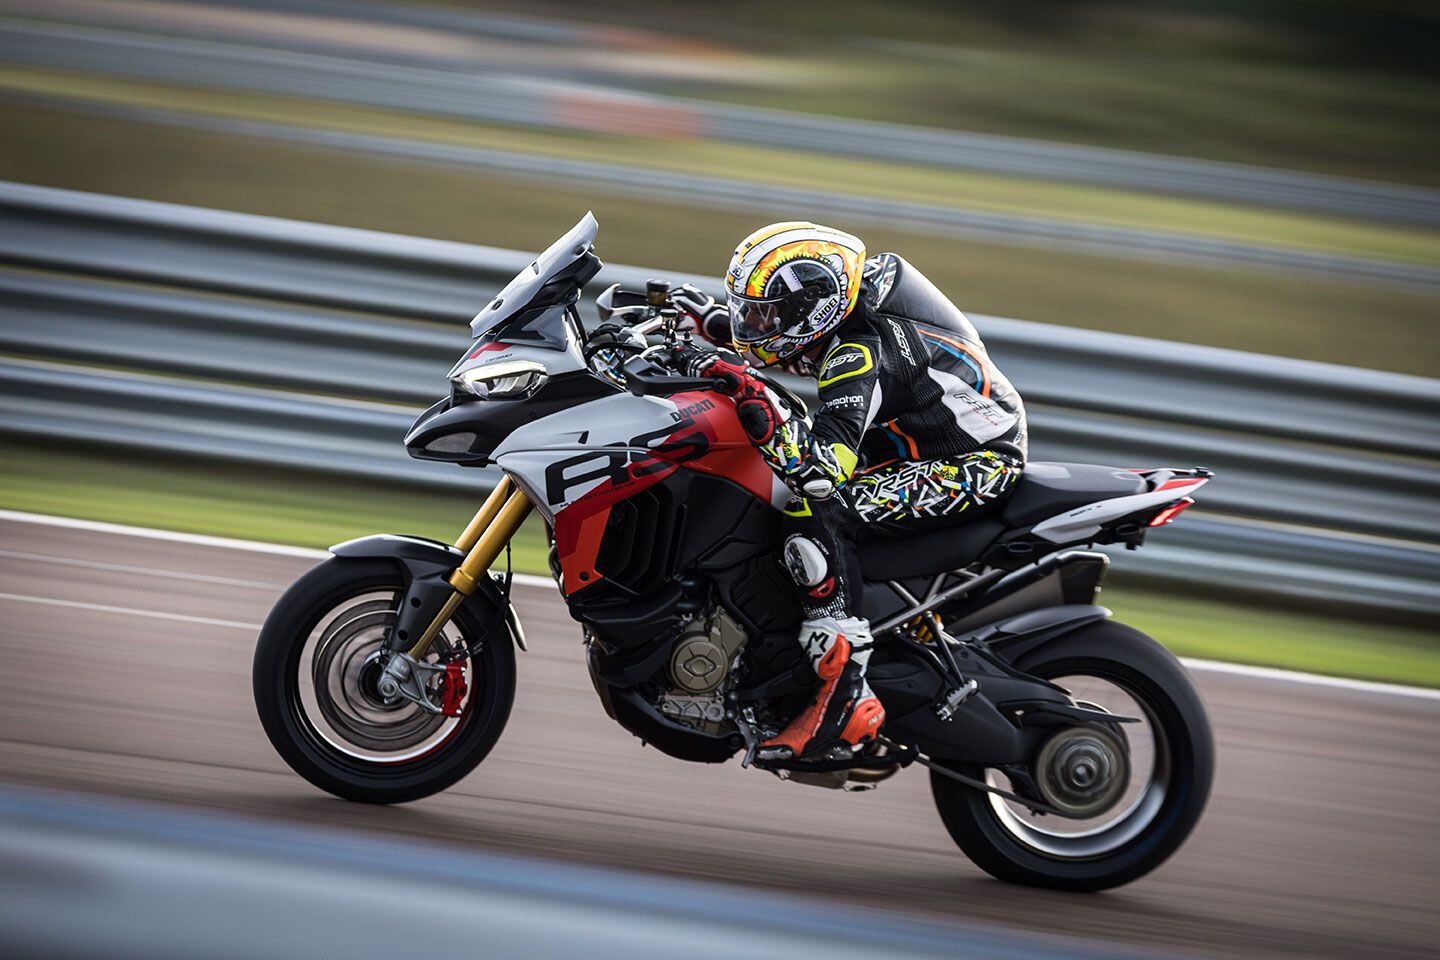 Ducati’s Multistrada V4 RS blurs the line between sportbike and sport-touring.